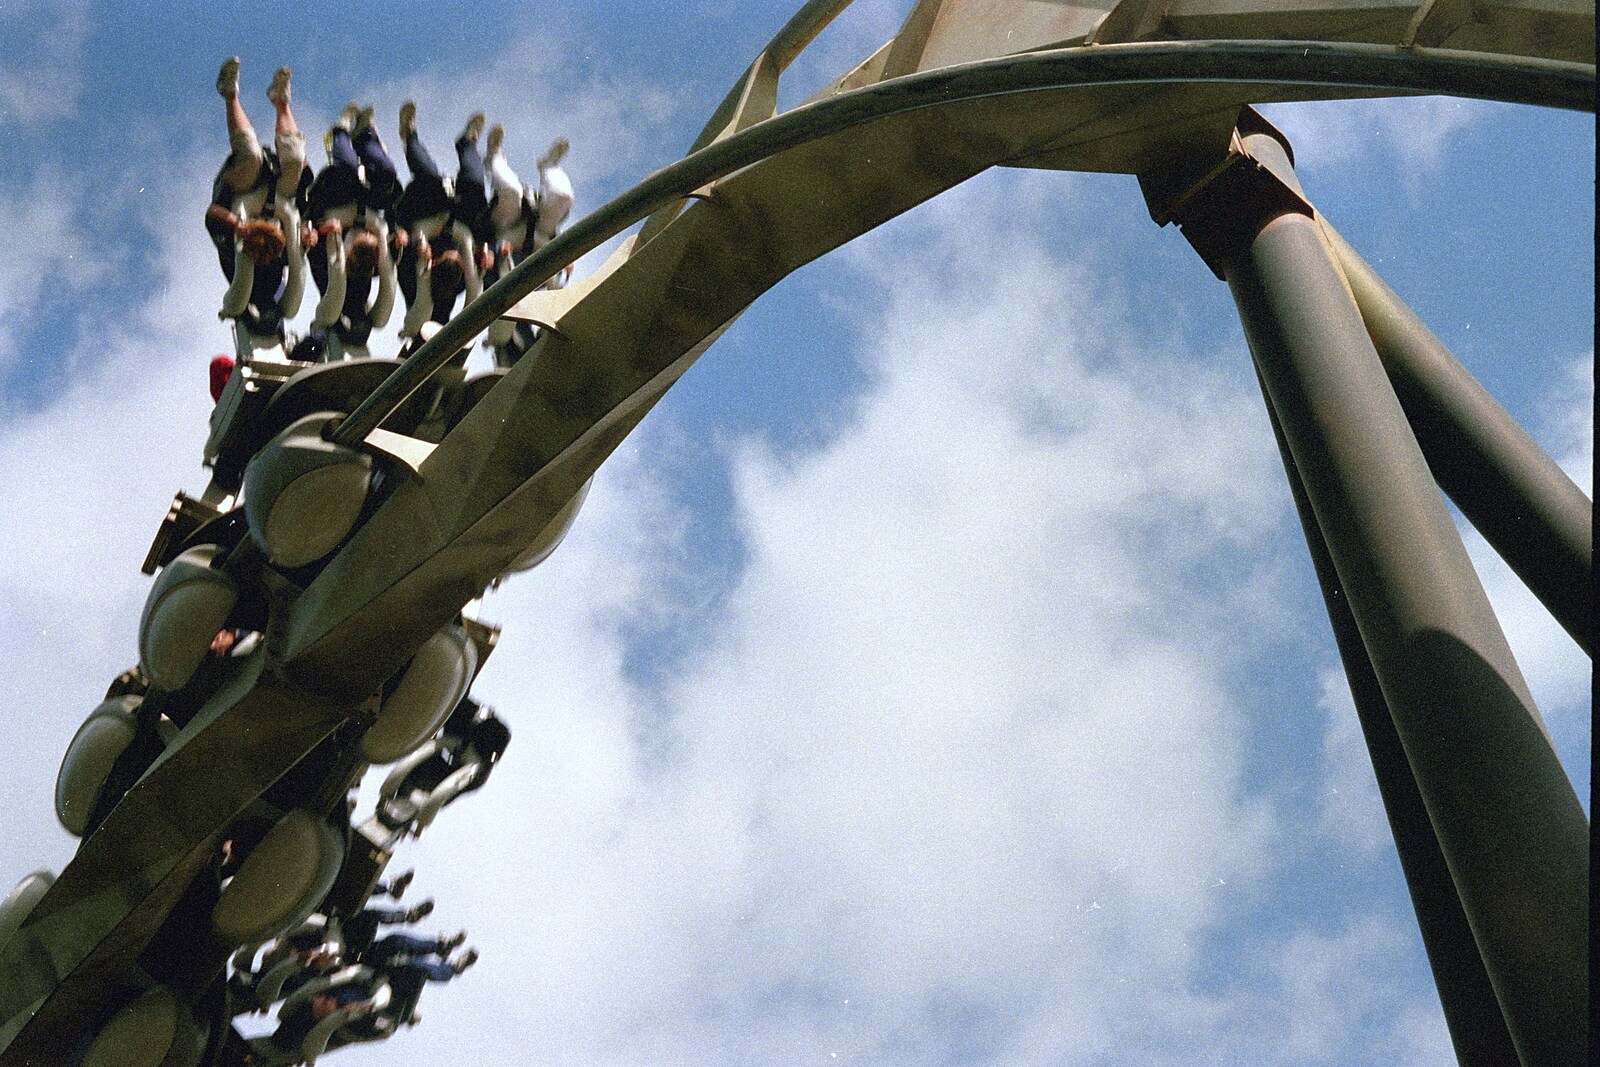 A Trip to Alton Towers, Staffordshire - 15th June 2000: Legs in the air on a rollercoaster